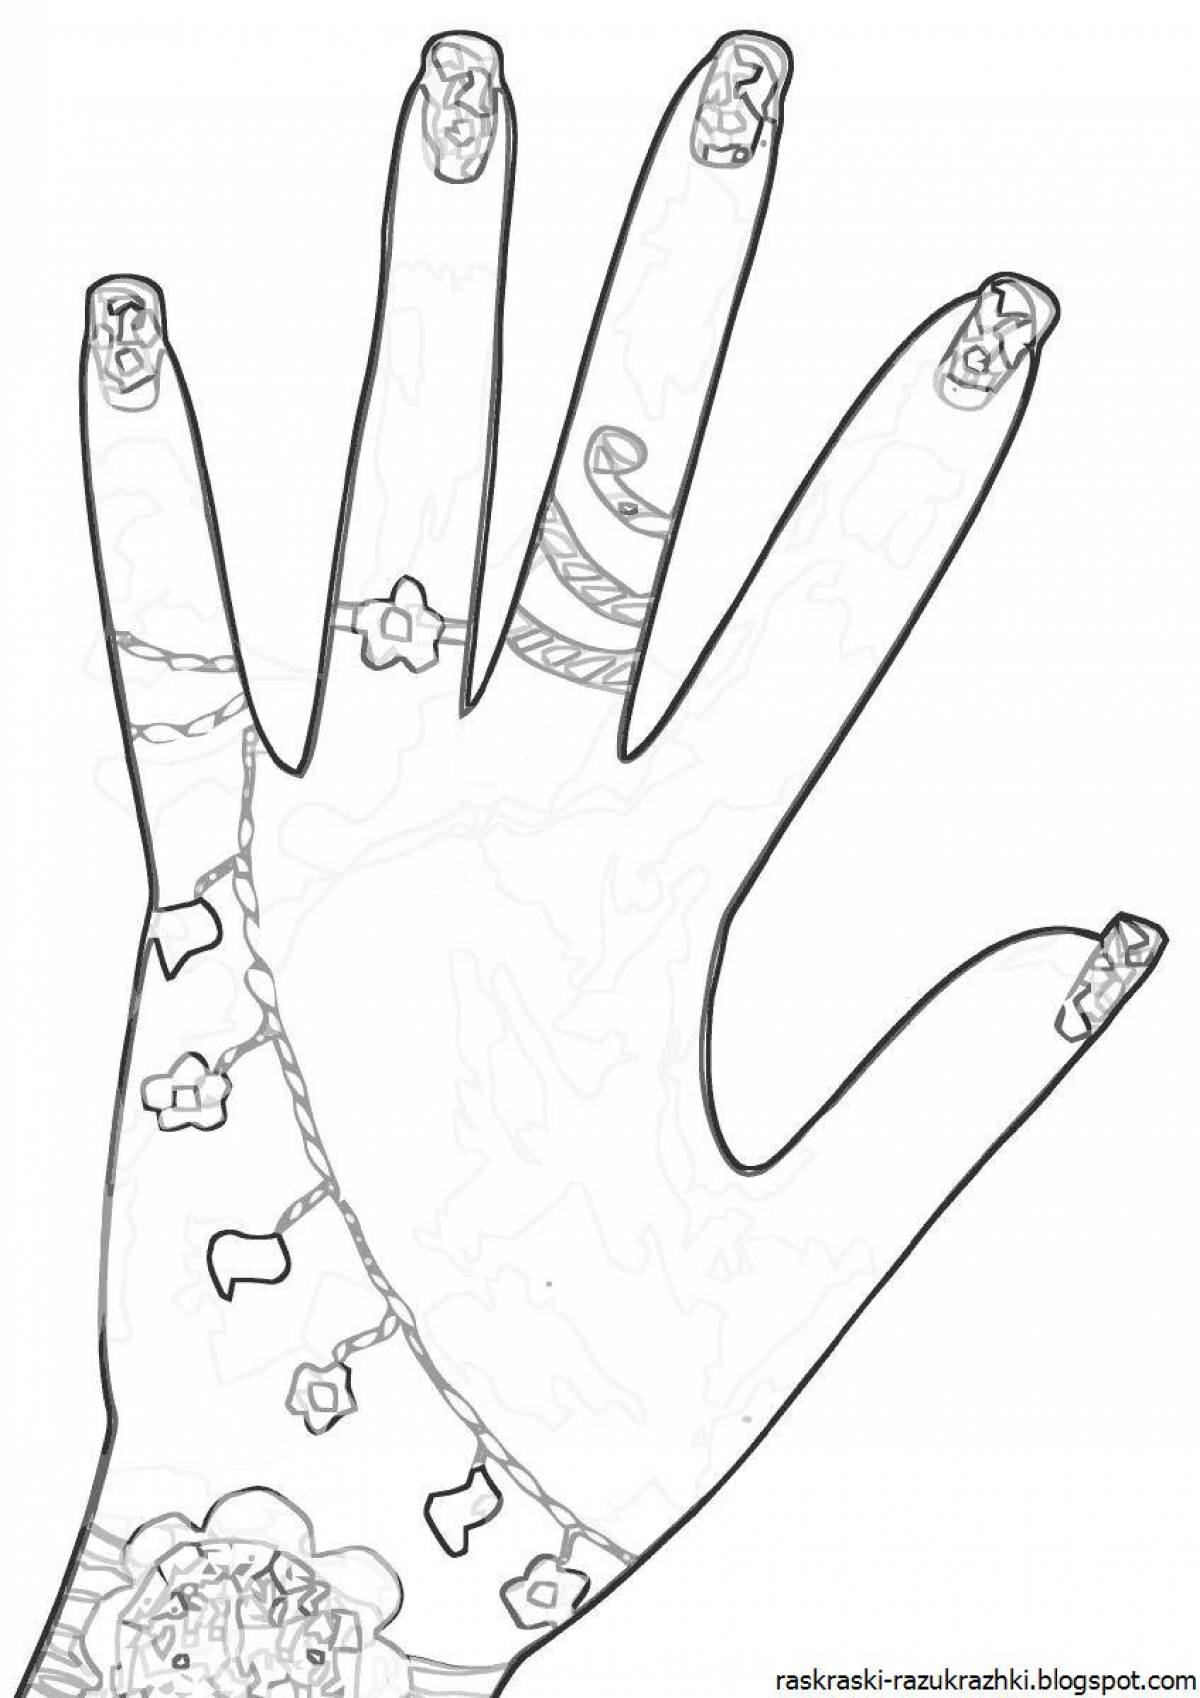 Coloring page festive hand with nails